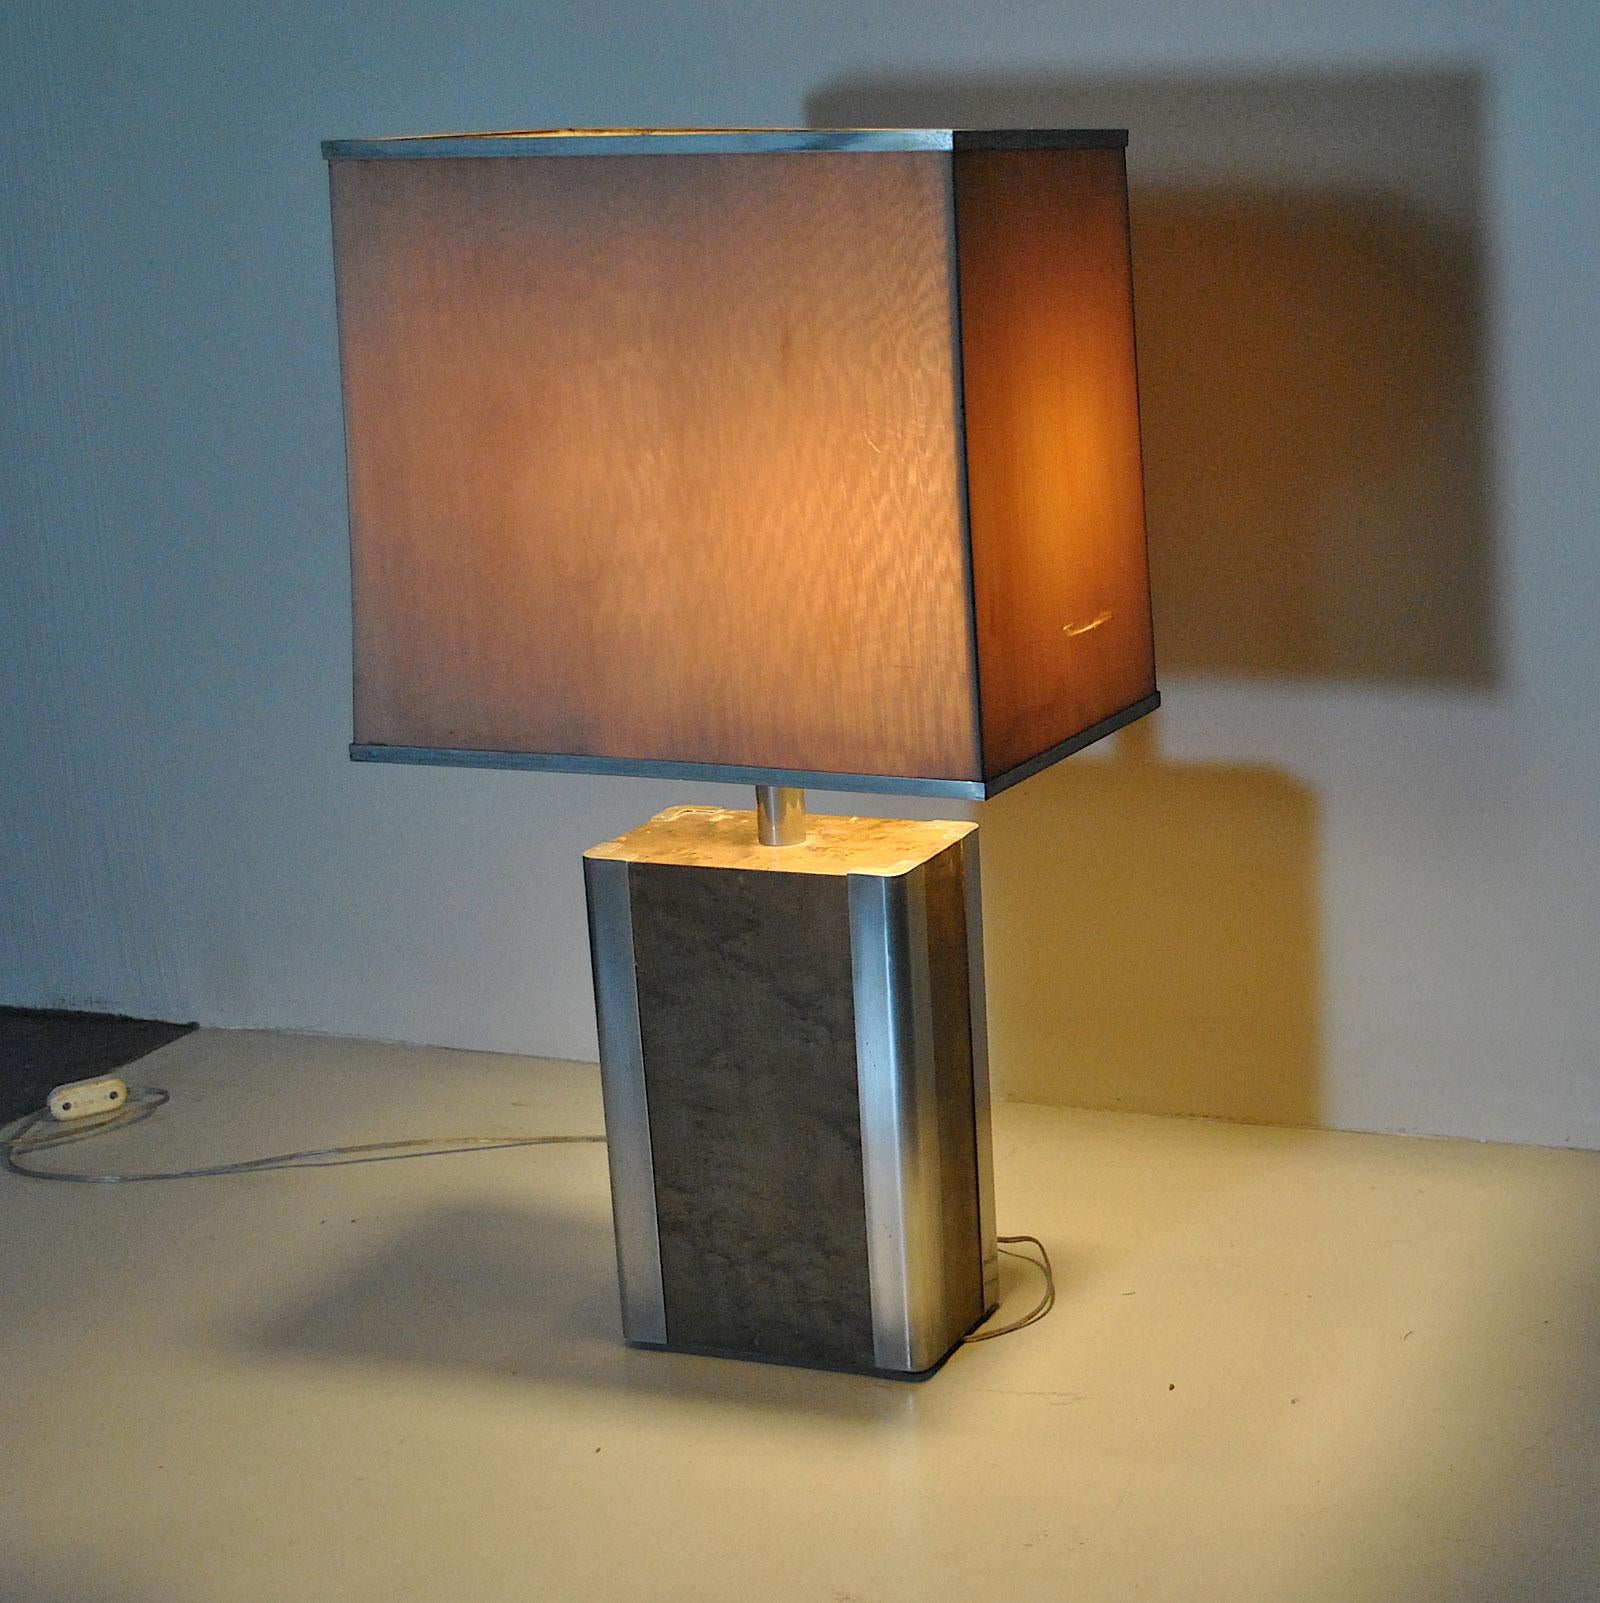 Italian Midcentury Table Lamp in Drawn Wood and Steel from the 1970s For Sale 6